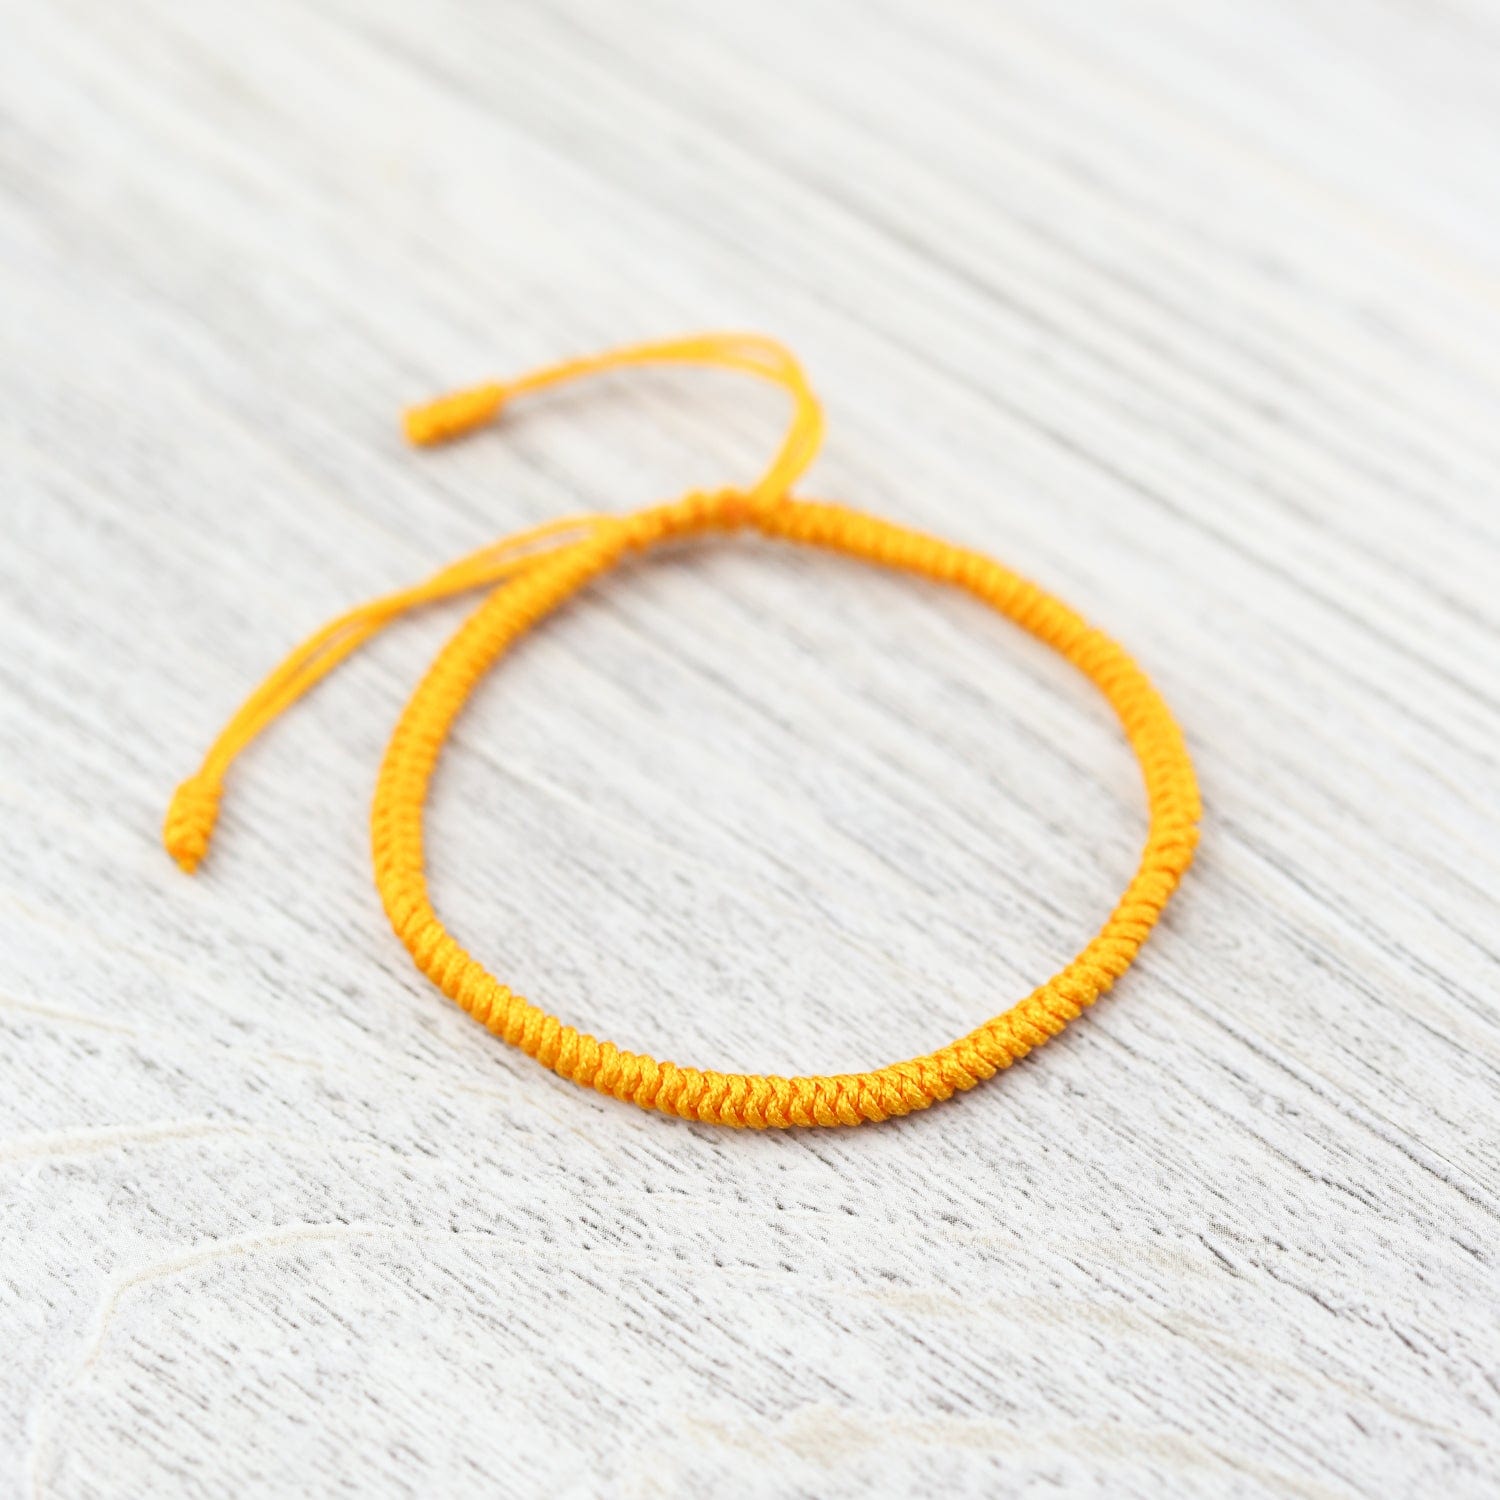 Tibetan Traditions Yellow Knotted Bracelet, Yellow Knotted Bracelet